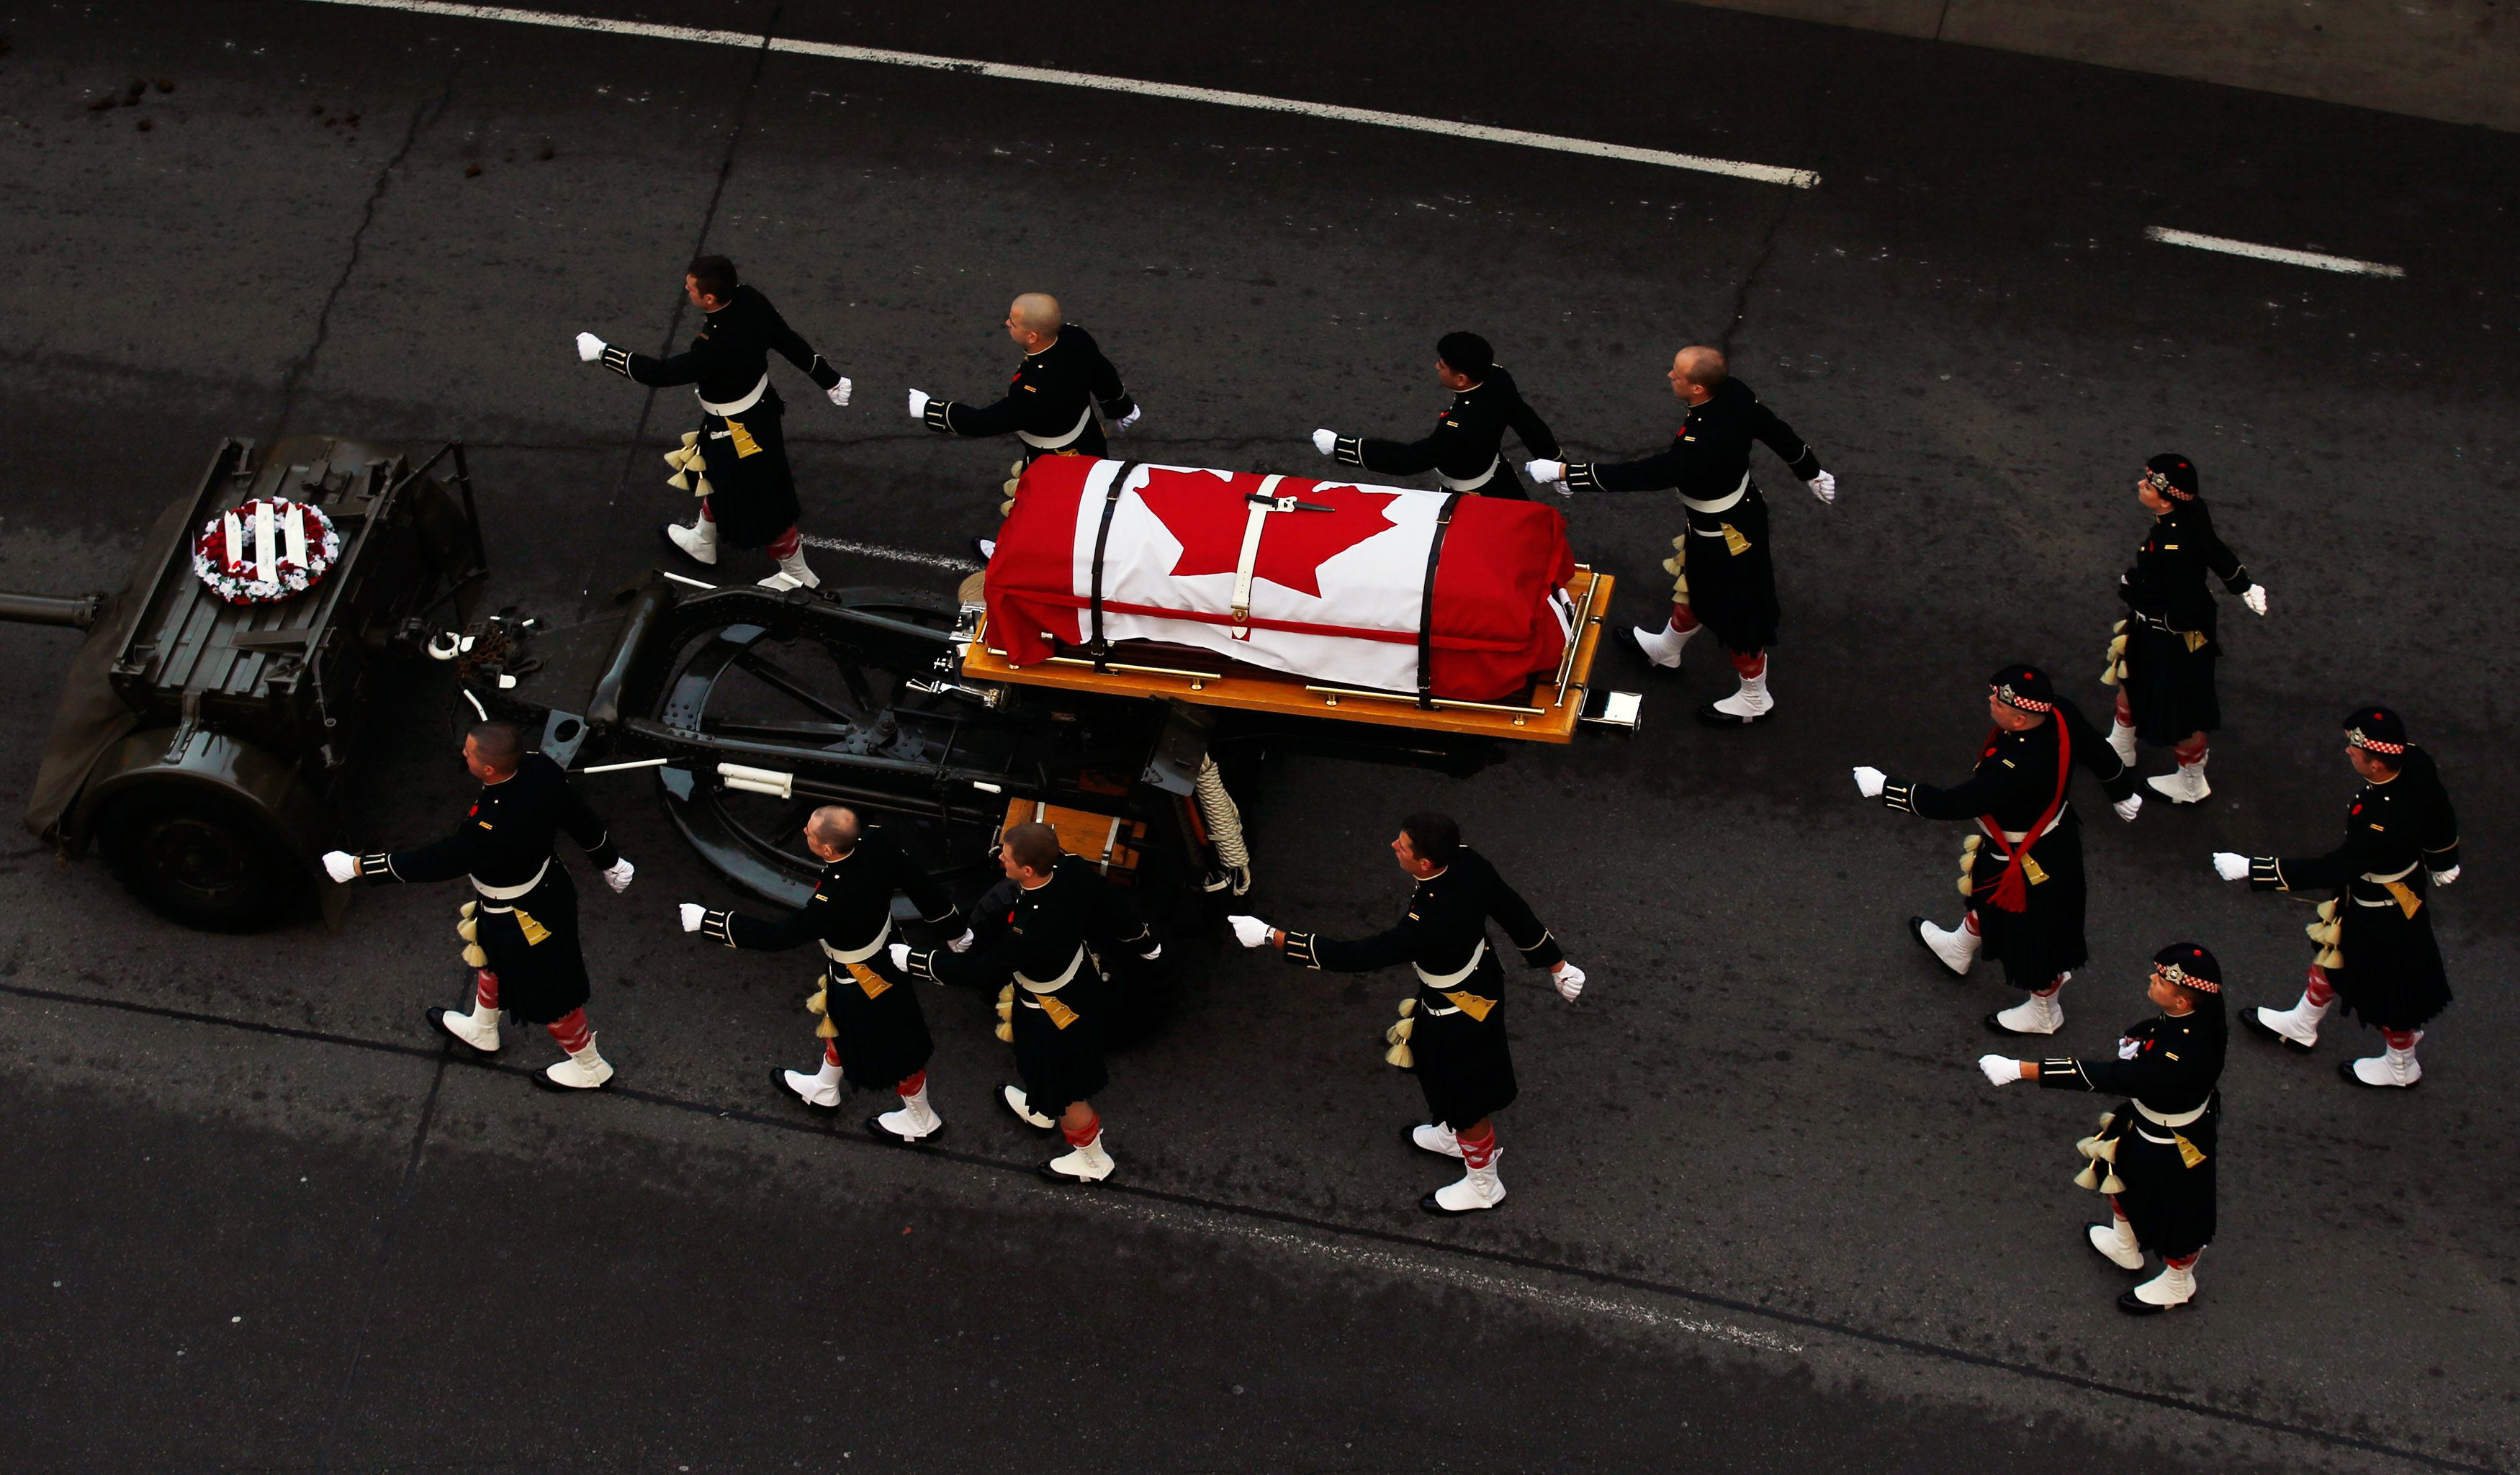 Soldiers escort the coffin during the funeral procession for Cpl. Nathan Cirillo in Hamilton